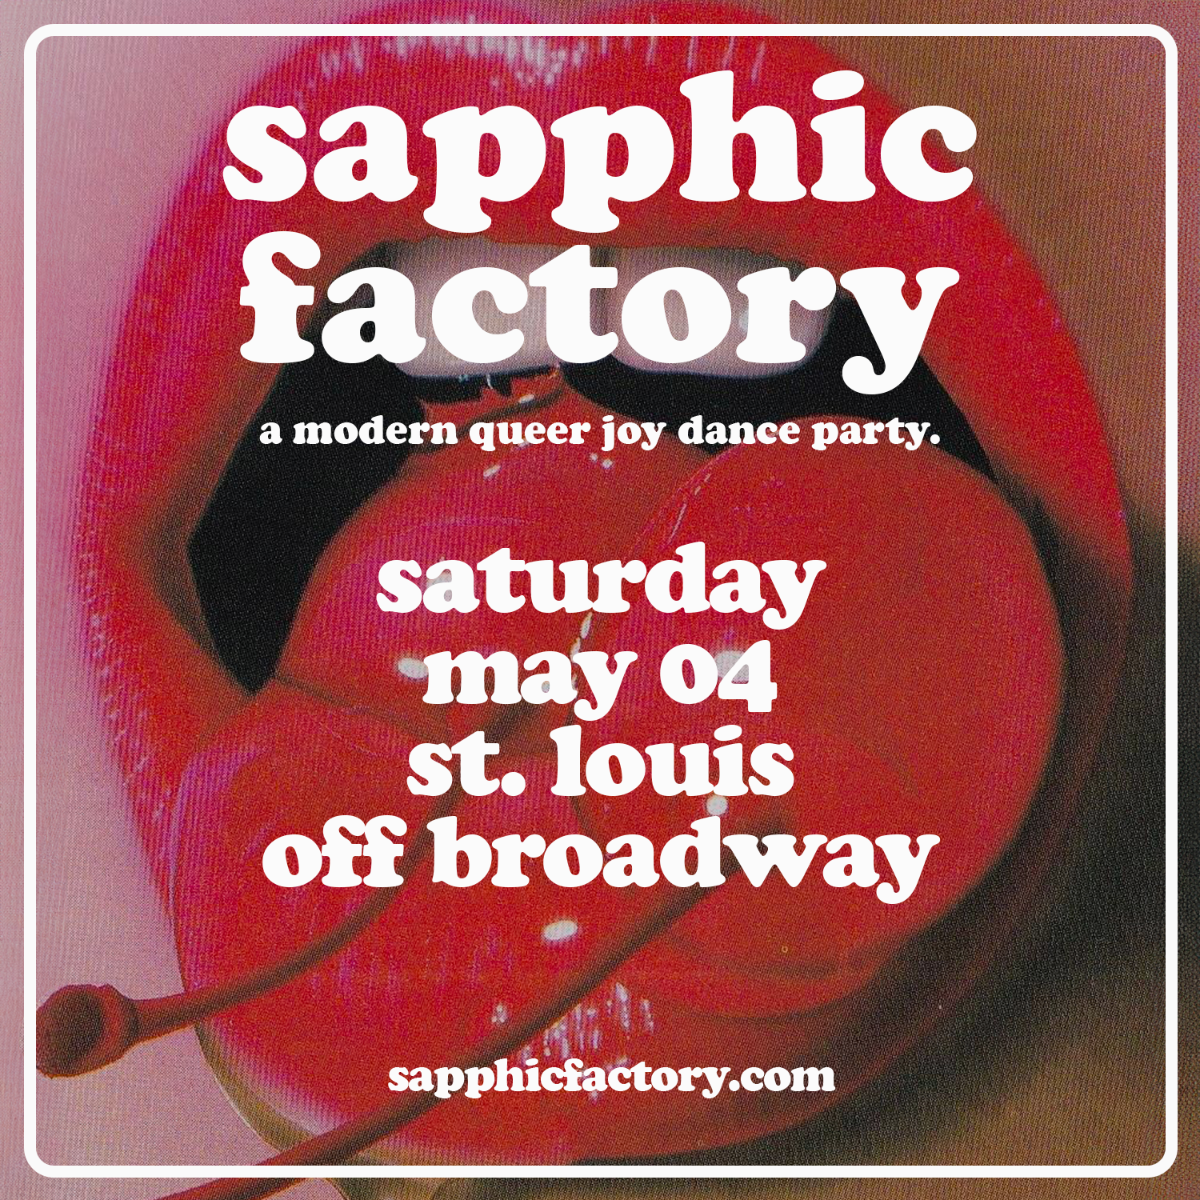 Sapphic Factory - A Modern Queer Joy Dance Party